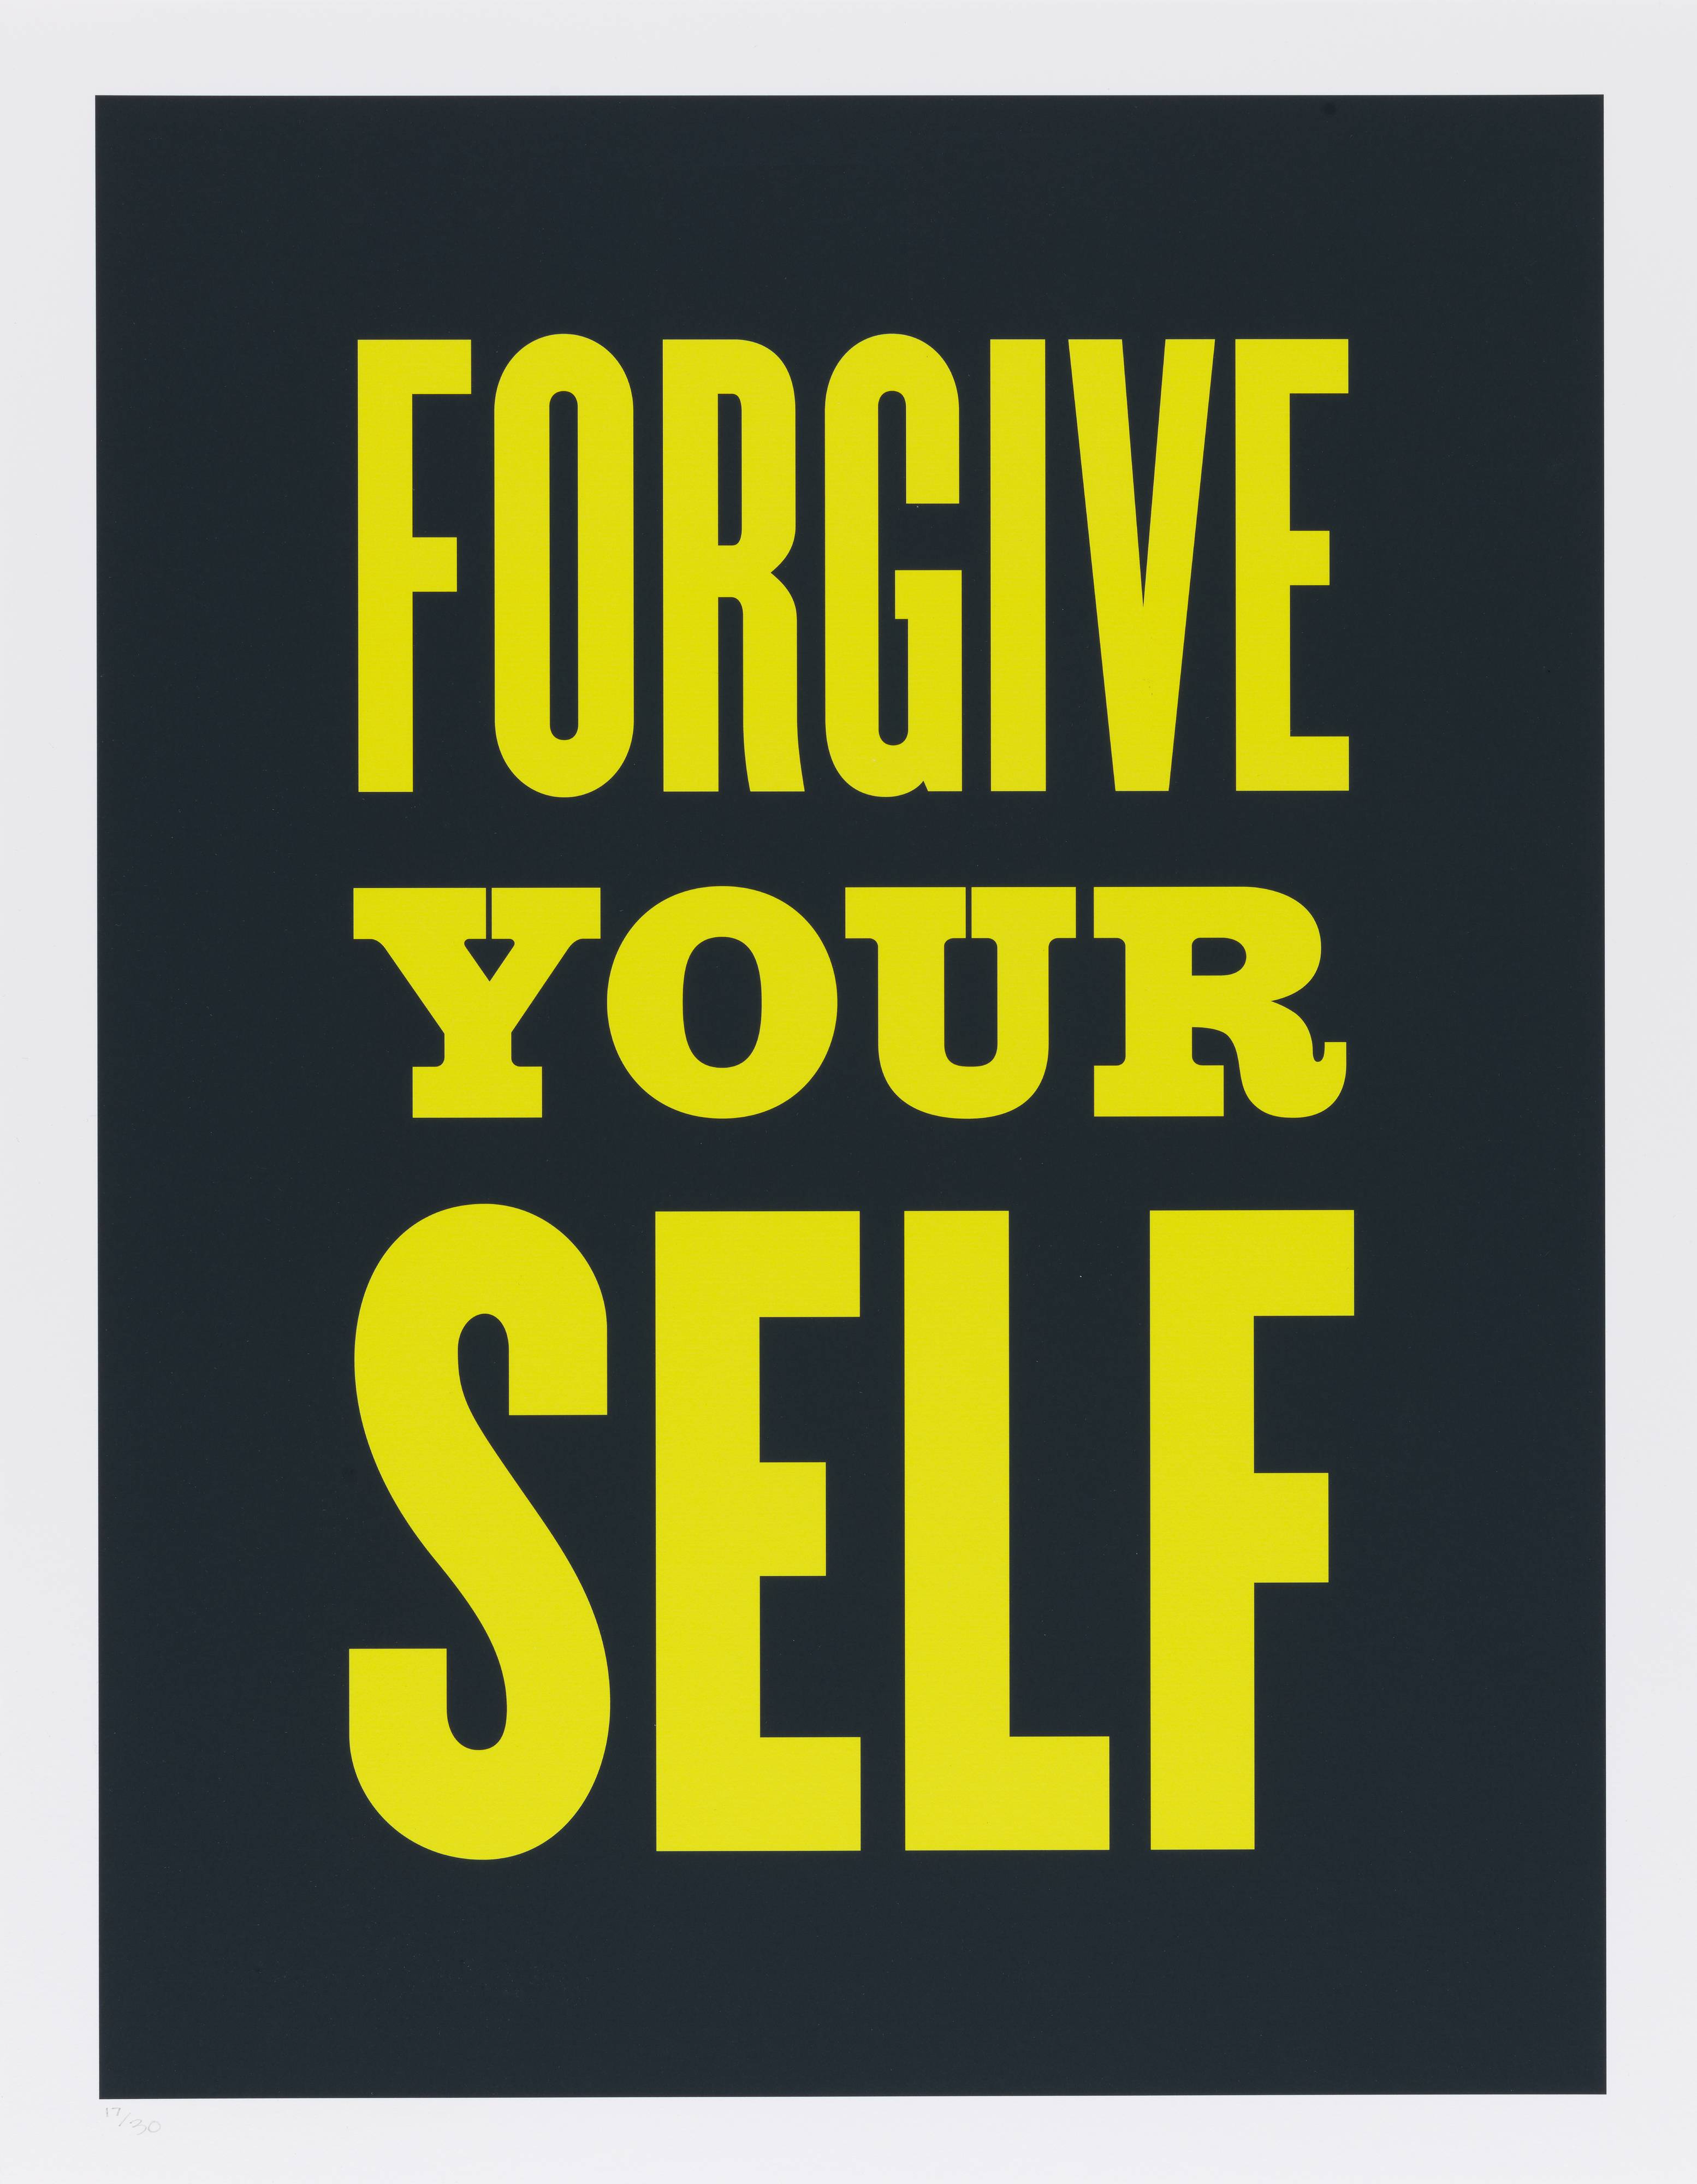 Forgive Yourself, from the series Advice from my 80 Year-Old-Self